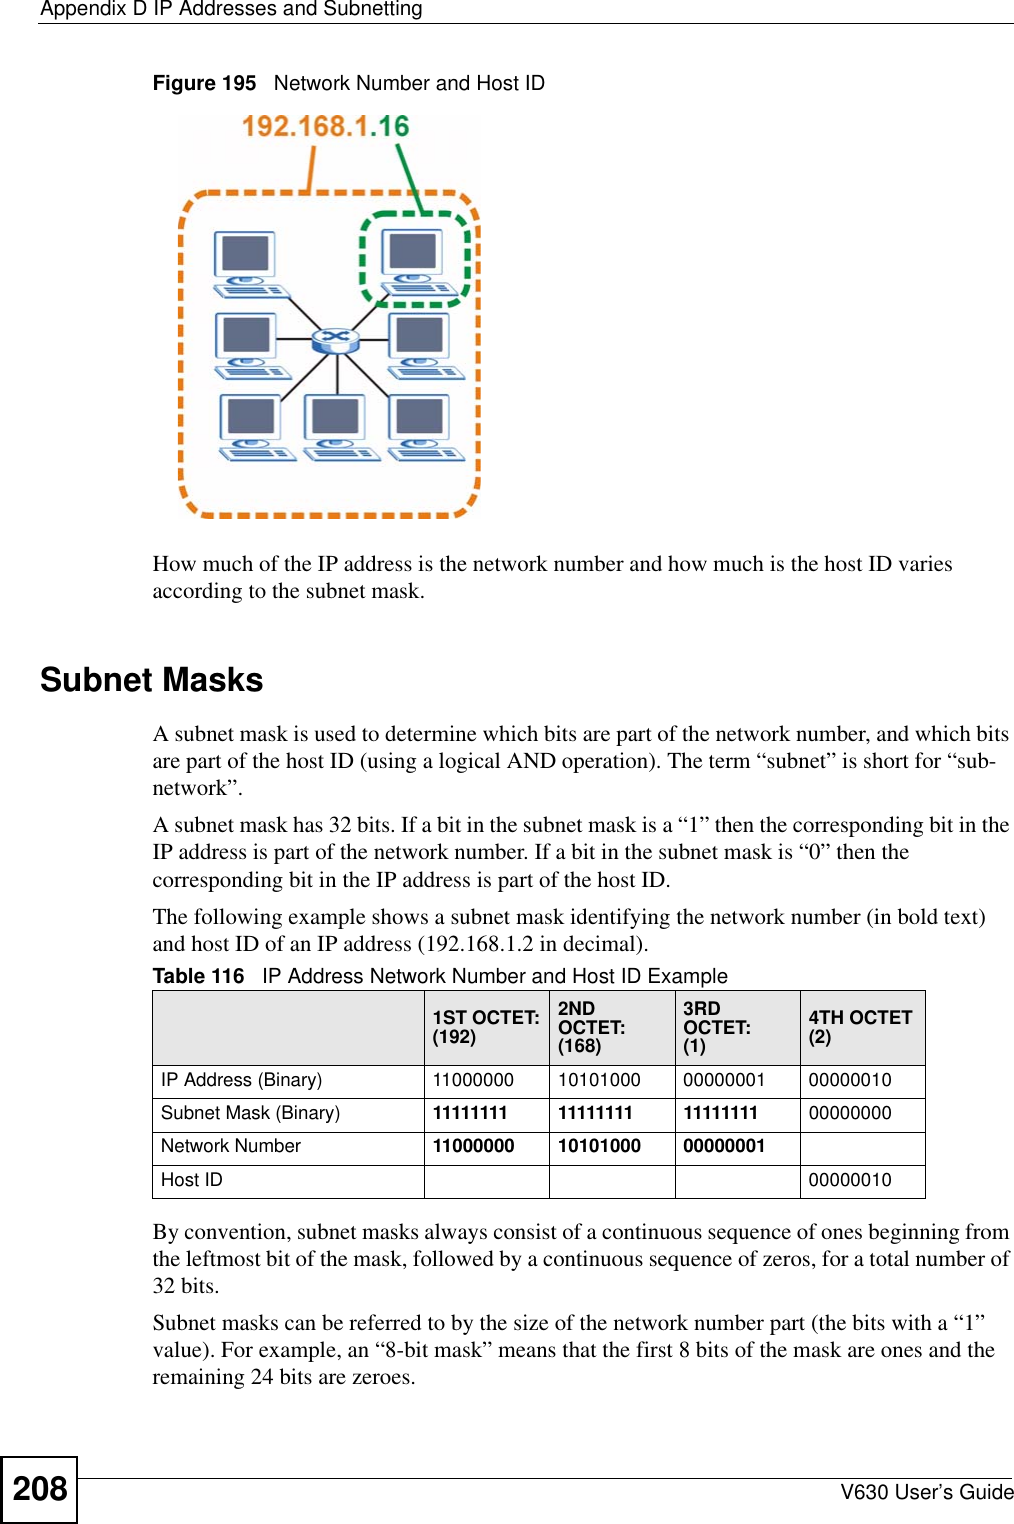 Appendix D IP Addresses and SubnettingV630 User’s Guide208Figure 195   Network Number and Host IDHow much of the IP address is the network number and how much is the host ID varies according to the subnet mask.  Subnet MasksA subnet mask is used to determine which bits are part of the network number, and which bits are part of the host ID (using a logical AND operation). The term “subnet” is short for “sub-network”.A subnet mask has 32 bits. If a bit in the subnet mask is a “1” then the corresponding bit in the IP address is part of the network number. If a bit in the subnet mask is “0” then the corresponding bit in the IP address is part of the host ID. The following example shows a subnet mask identifying the network number (in bold text) and host ID of an IP address (192.168.1.2 in decimal).By convention, subnet masks always consist of a continuous sequence of ones beginning from the leftmost bit of the mask, followed by a continuous sequence of zeros, for a total number of 32 bits.Subnet masks can be referred to by the size of the network number part (the bits with a “1” value). For example, an “8-bit mask” means that the first 8 bits of the mask are ones and the remaining 24 bits are zeroes.Table 116   IP Address Network Number and Host ID Example1ST OCTET:(192)2ND OCTET:(168)3RD OCTET:(1)4TH OCTET(2)IP Address (Binary) 11000000 10101000 00000001 00000010Subnet Mask (Binary) 11111111 11111111 11111111 00000000Network Number 11000000 10101000 00000001Host ID 00000010